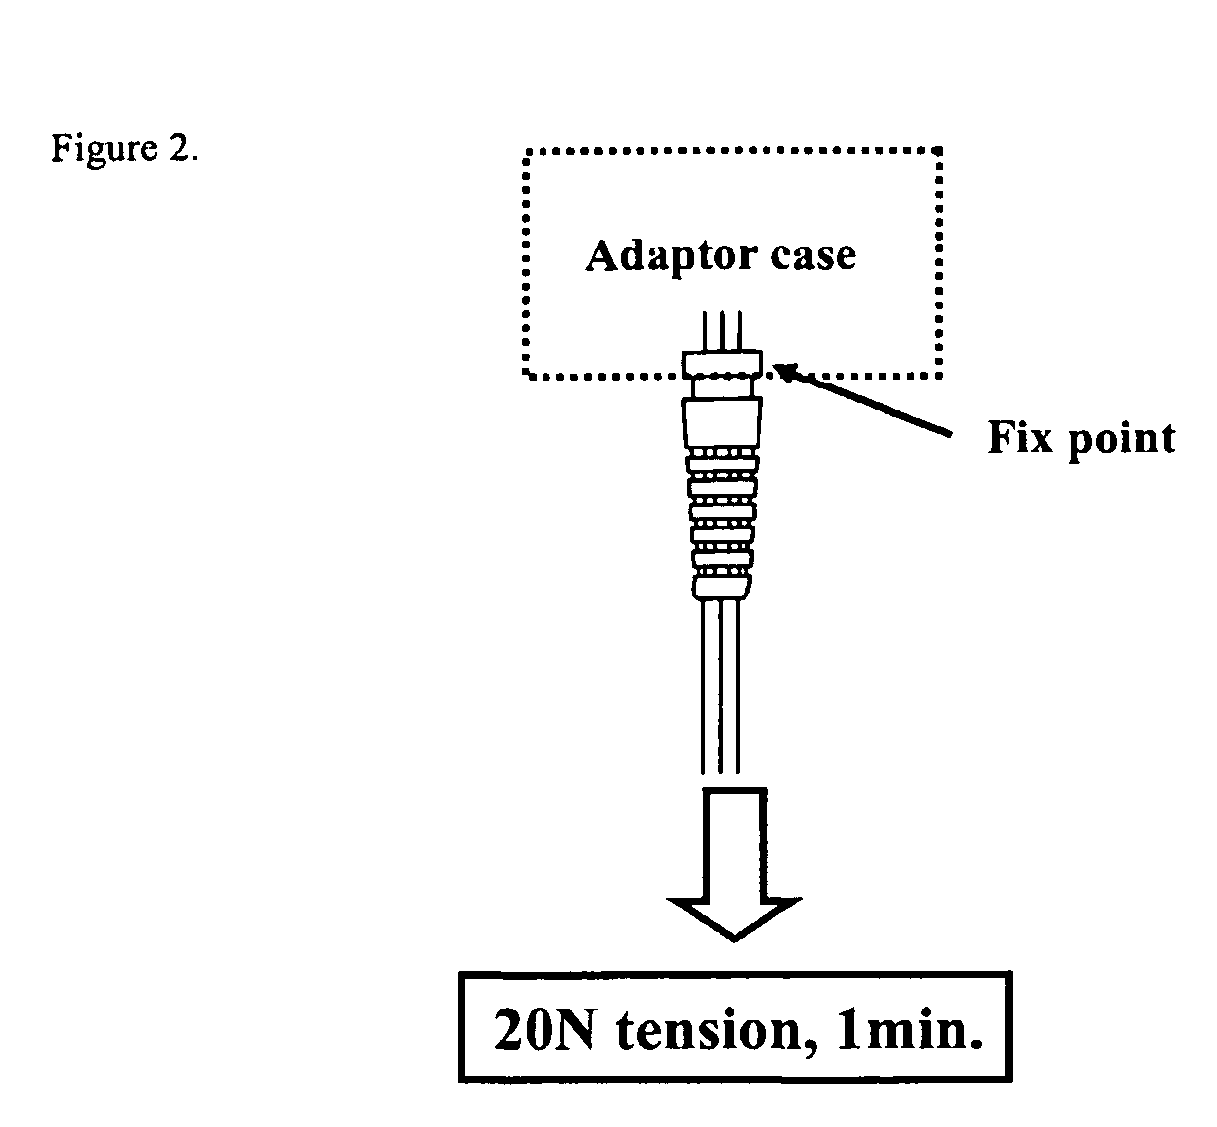 Flexible poly(arylene ether)composition and articles thereof